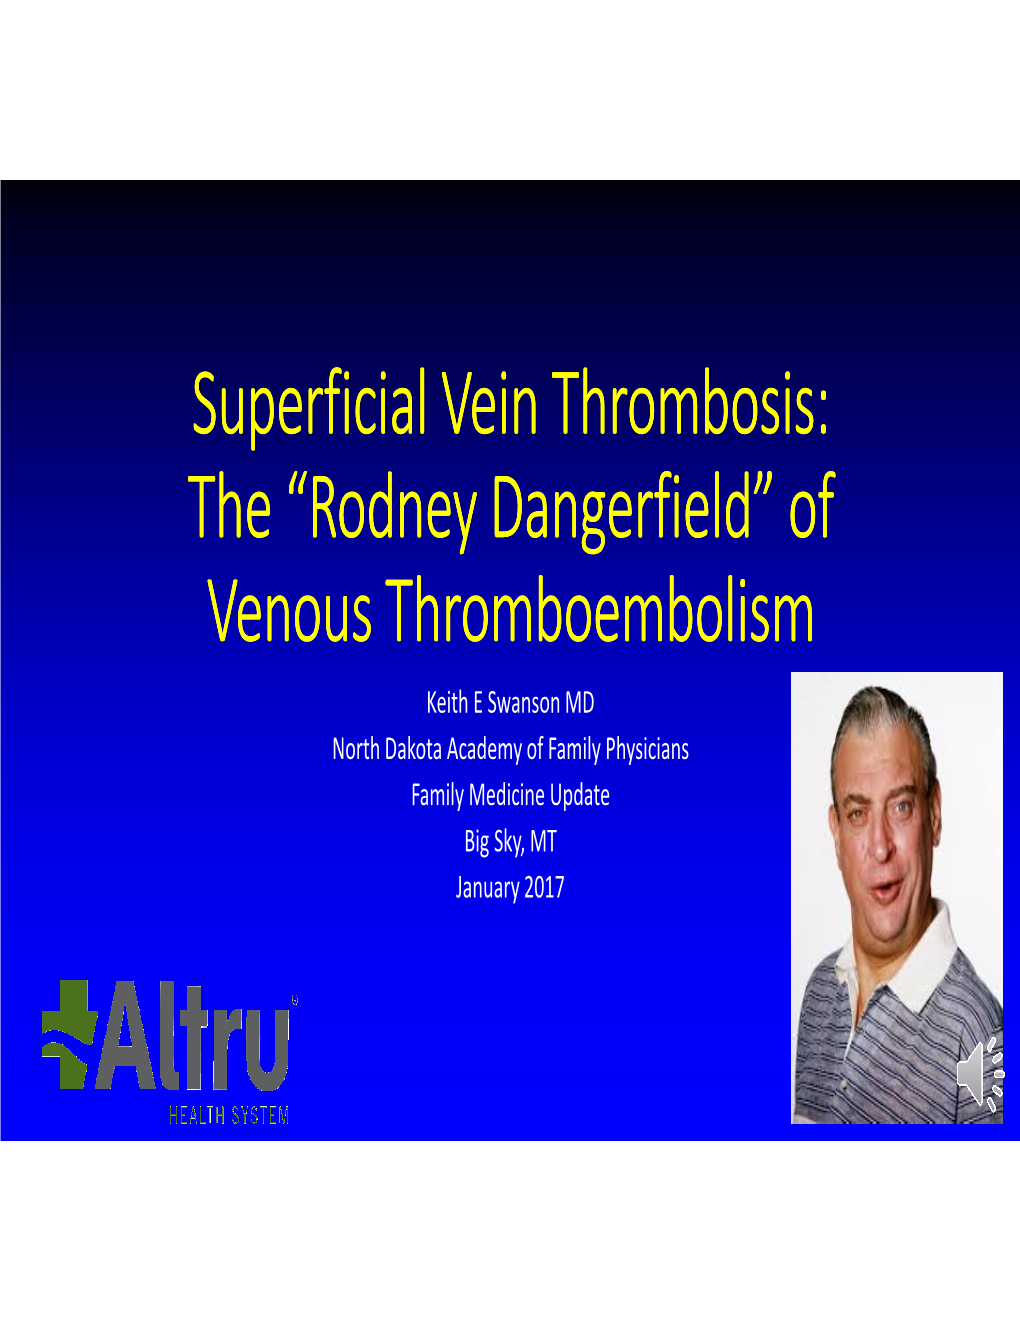 Superficial Vein Thrombosis: the “Rodney Dangerfield” of Venous